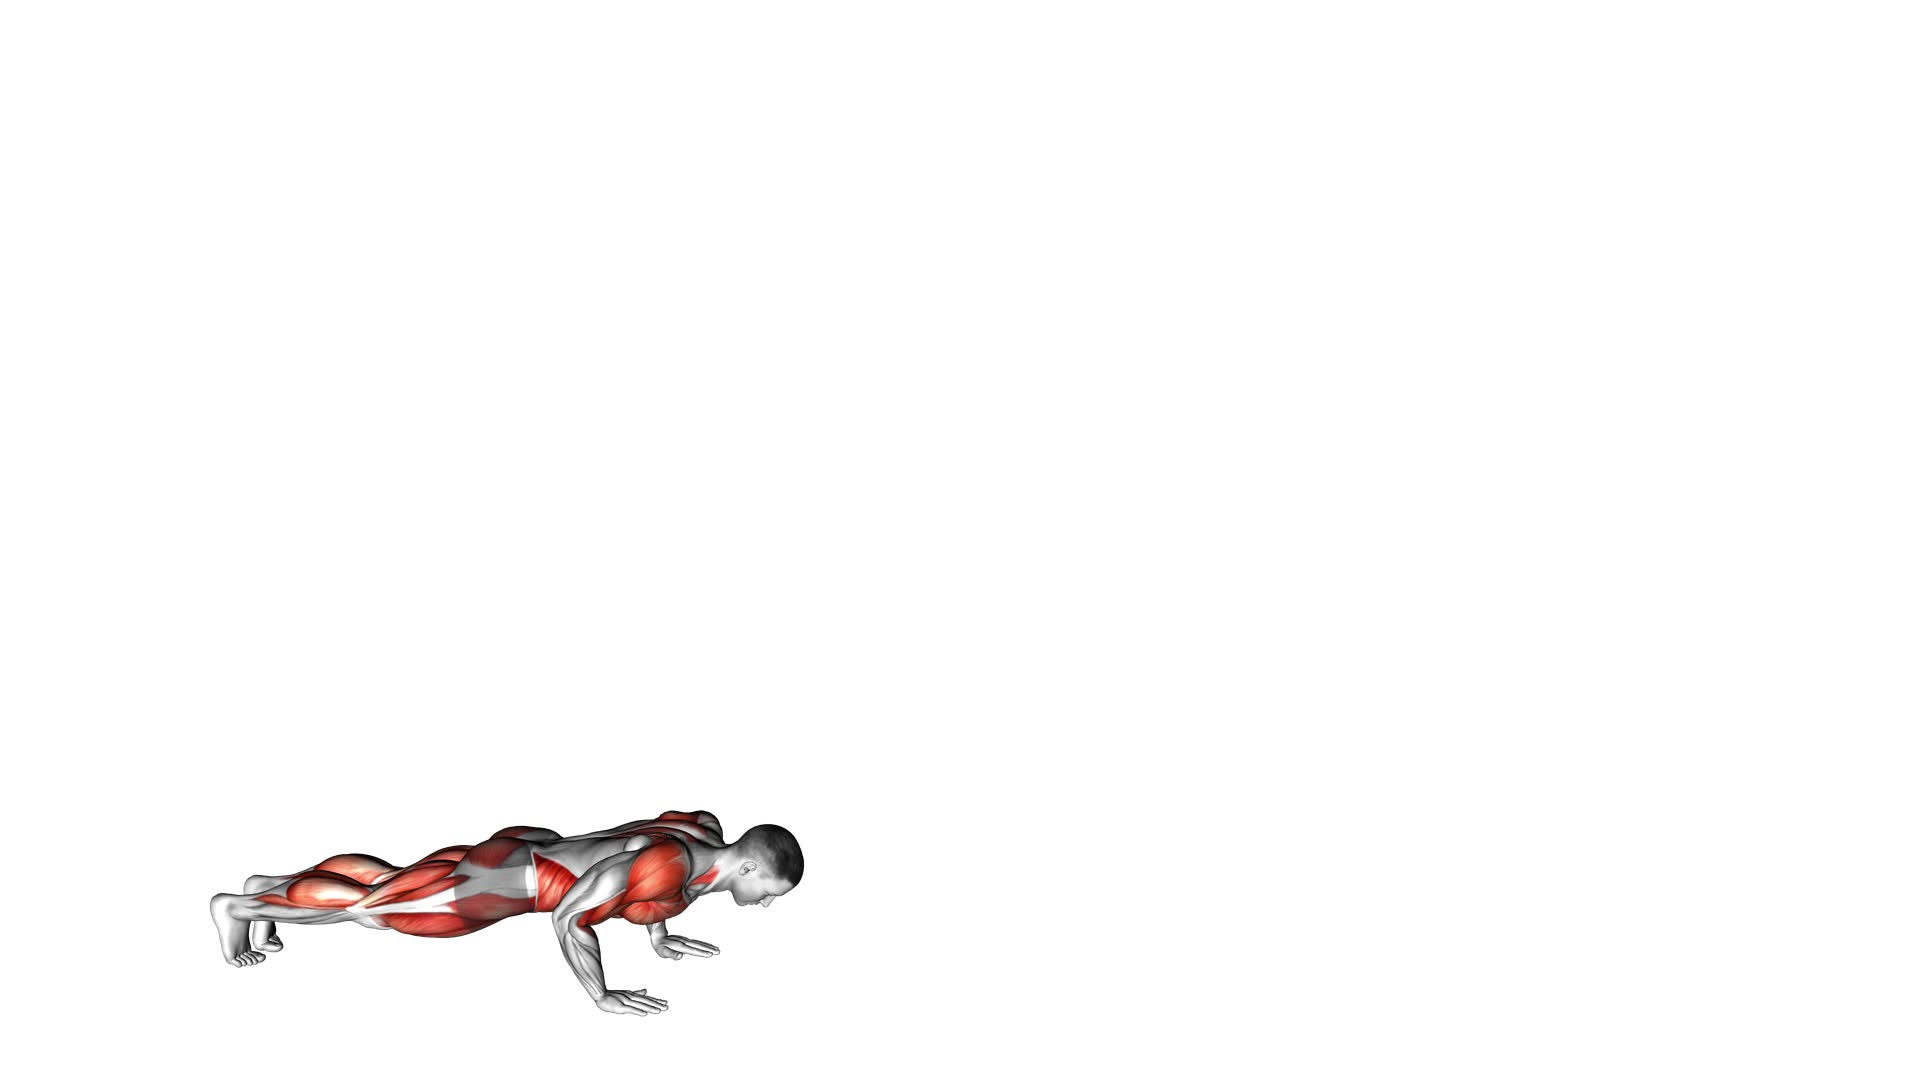 Burpee Long Jump With Push-Up (Male) - Video Exercise Guide & Tips